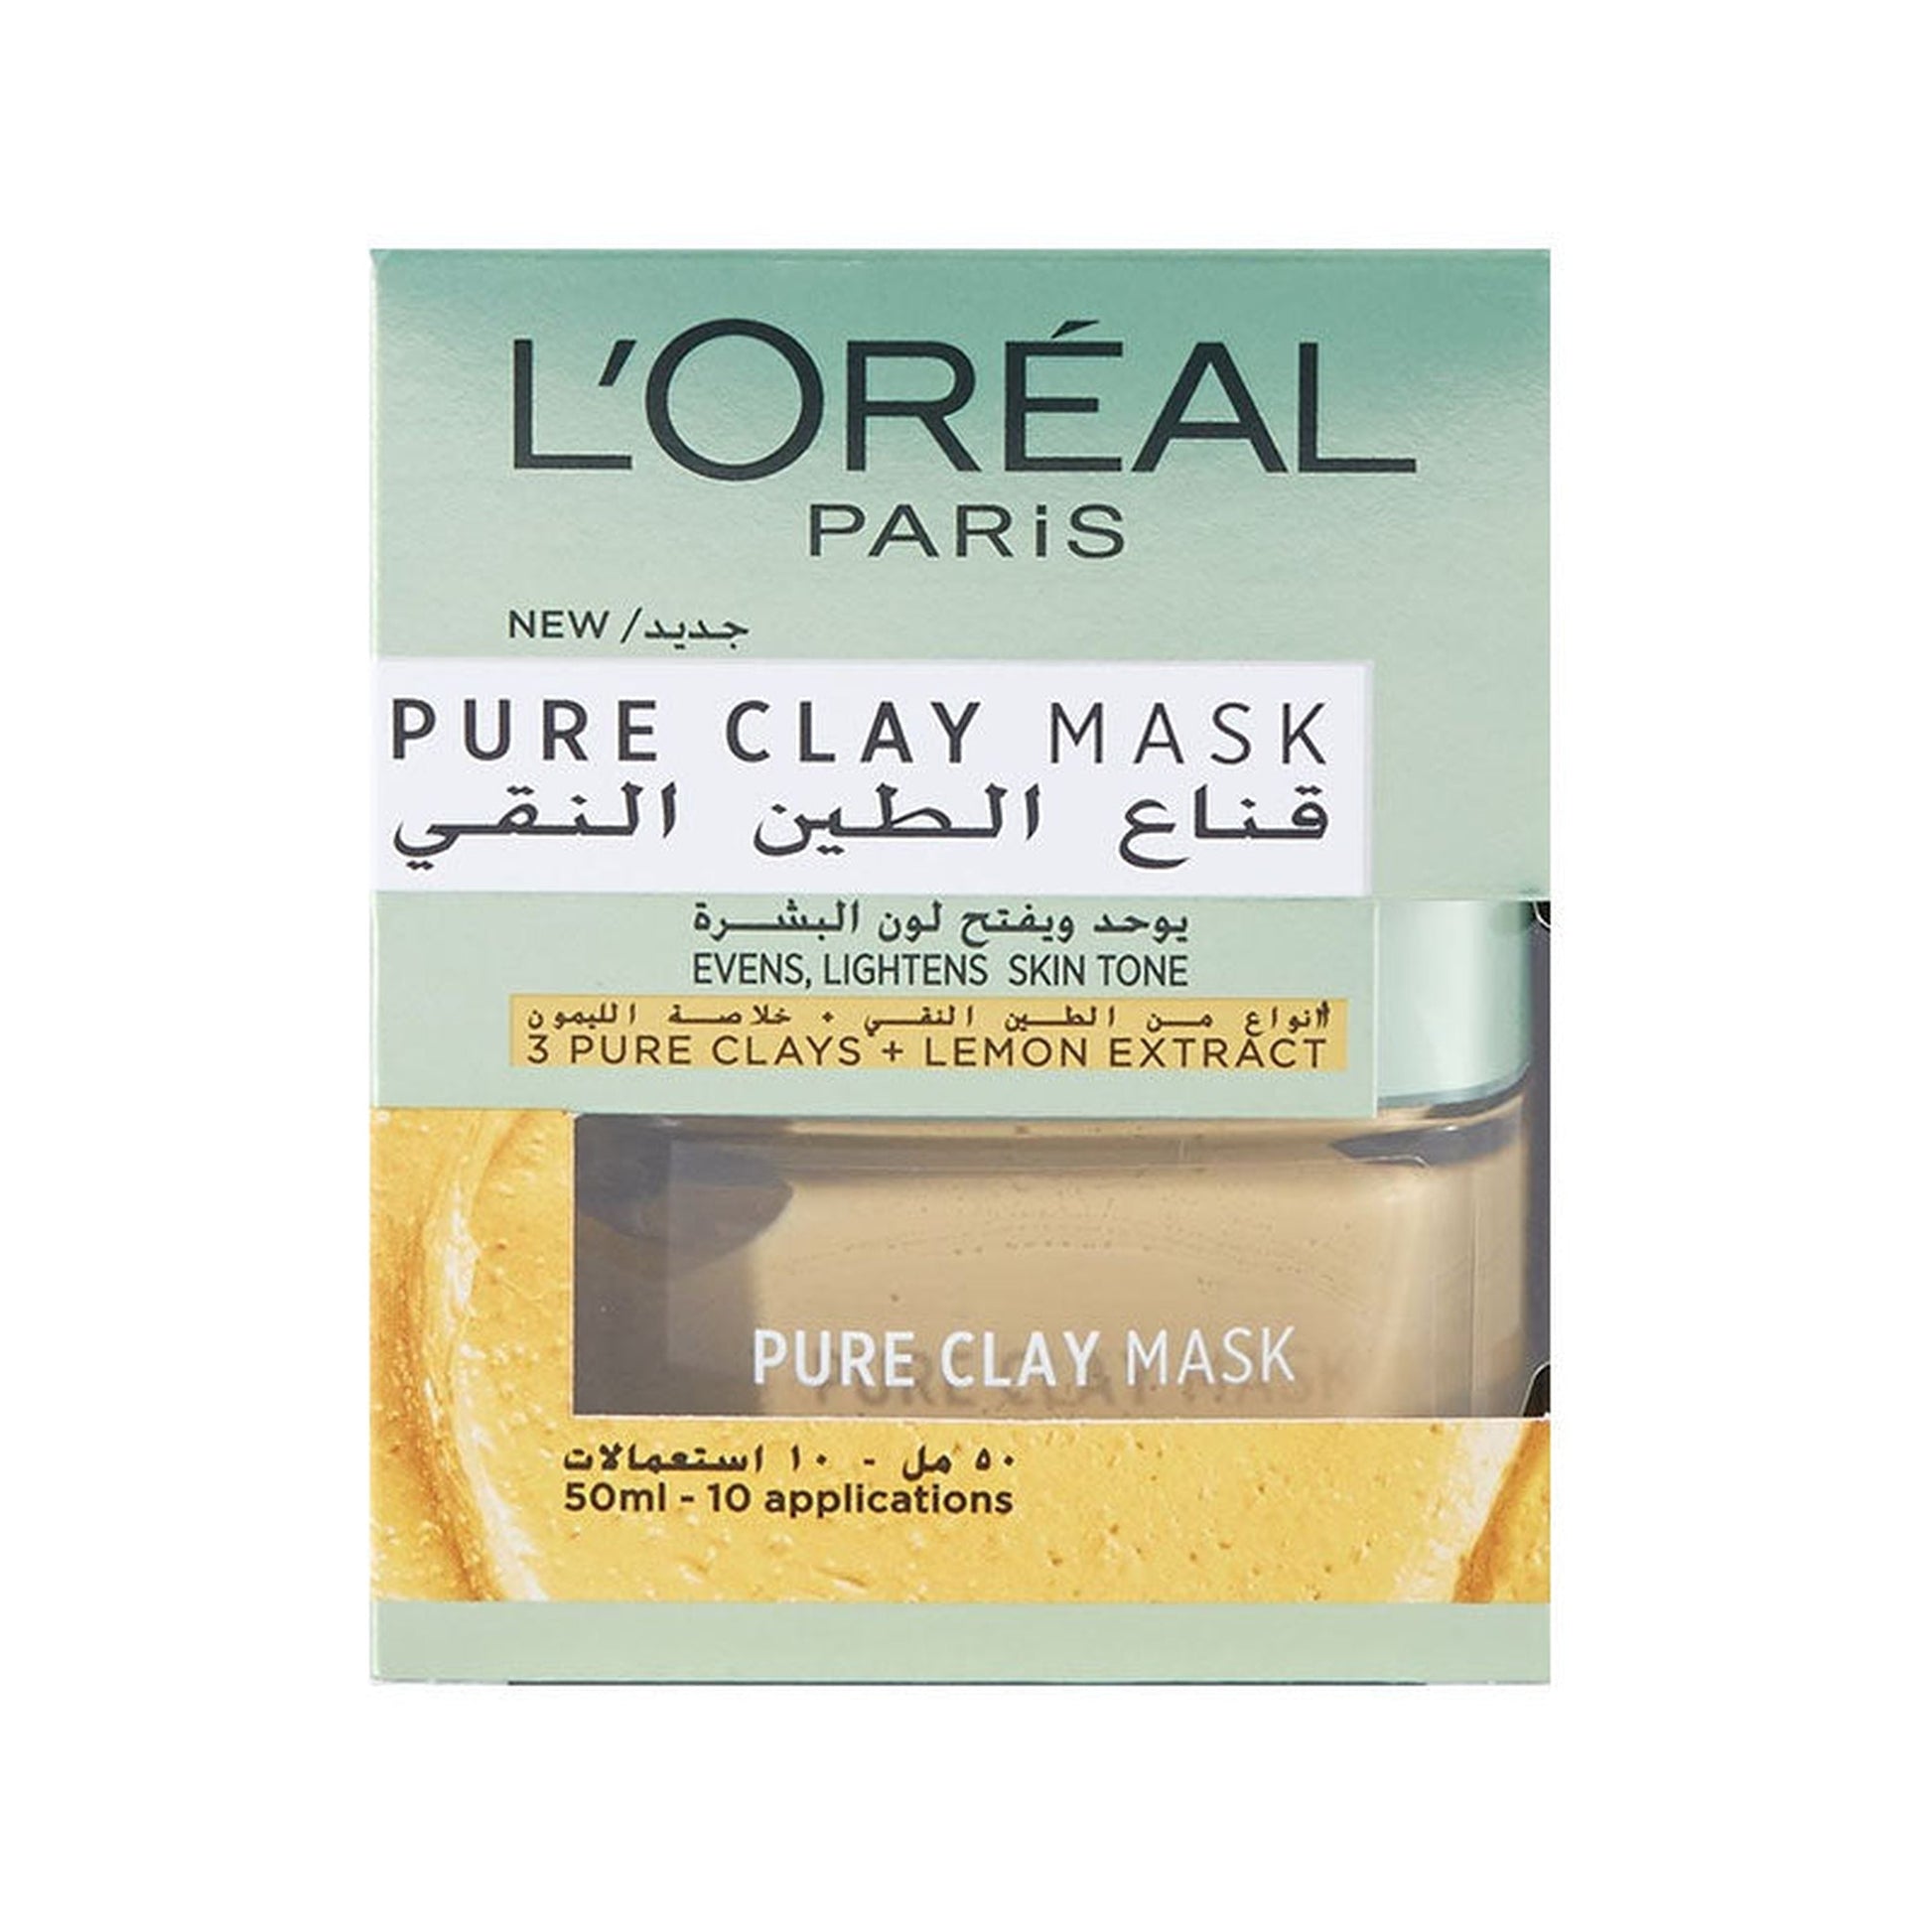 L'Oreal Pure Clay Mask 3 Pure Clays + Lemon Extract-L'Oreal-BeautyNmakeup.co.uk